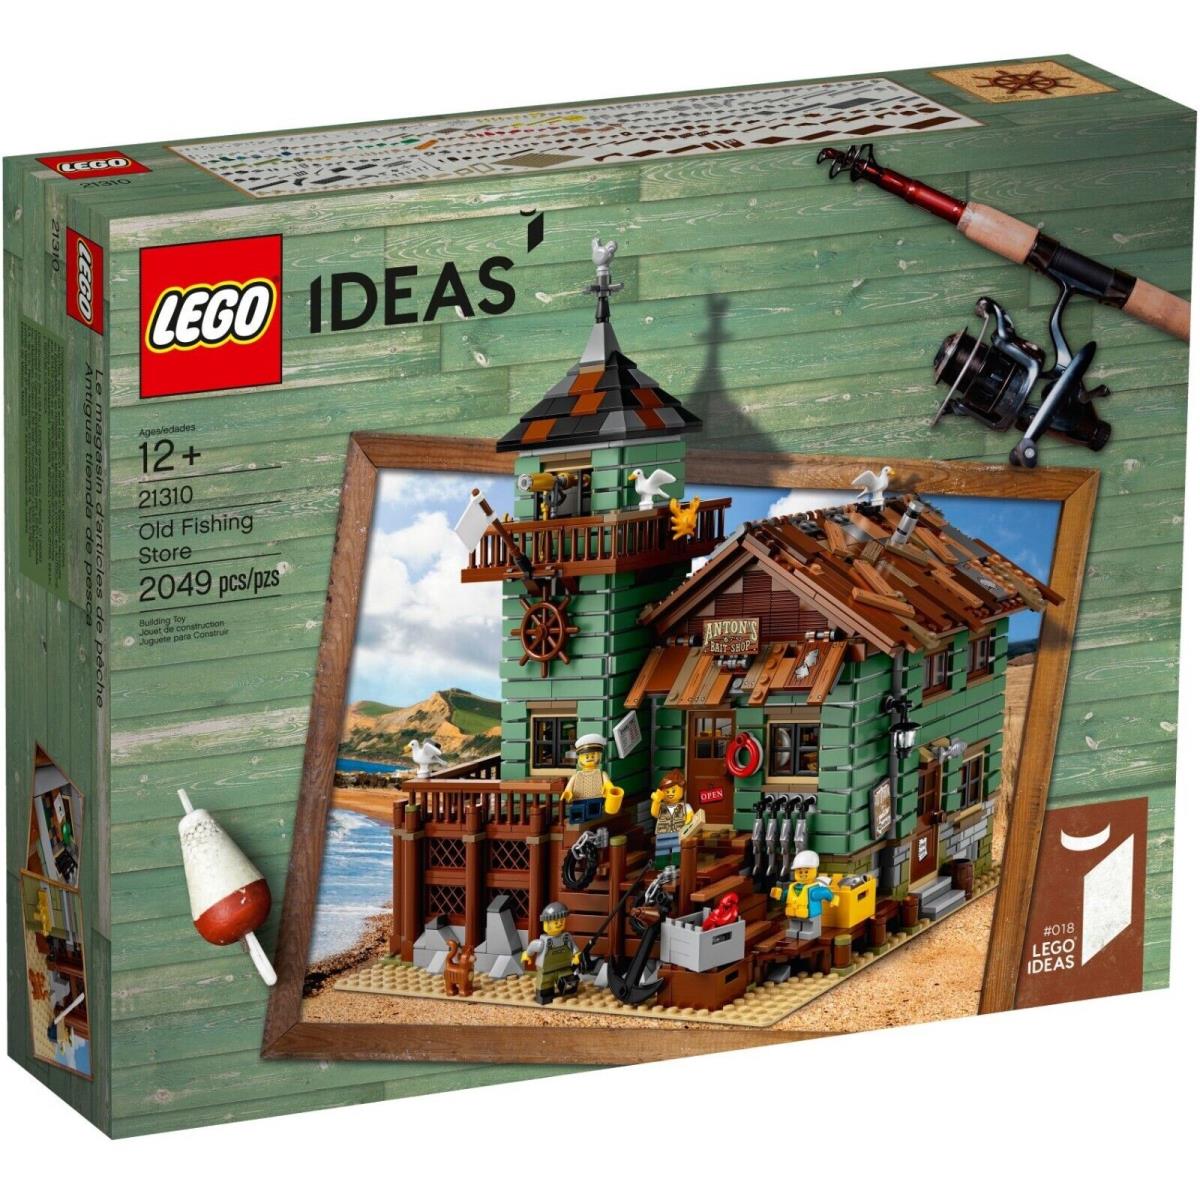 Lego Ideas 21310 Old Fishing Store Retired Building Set